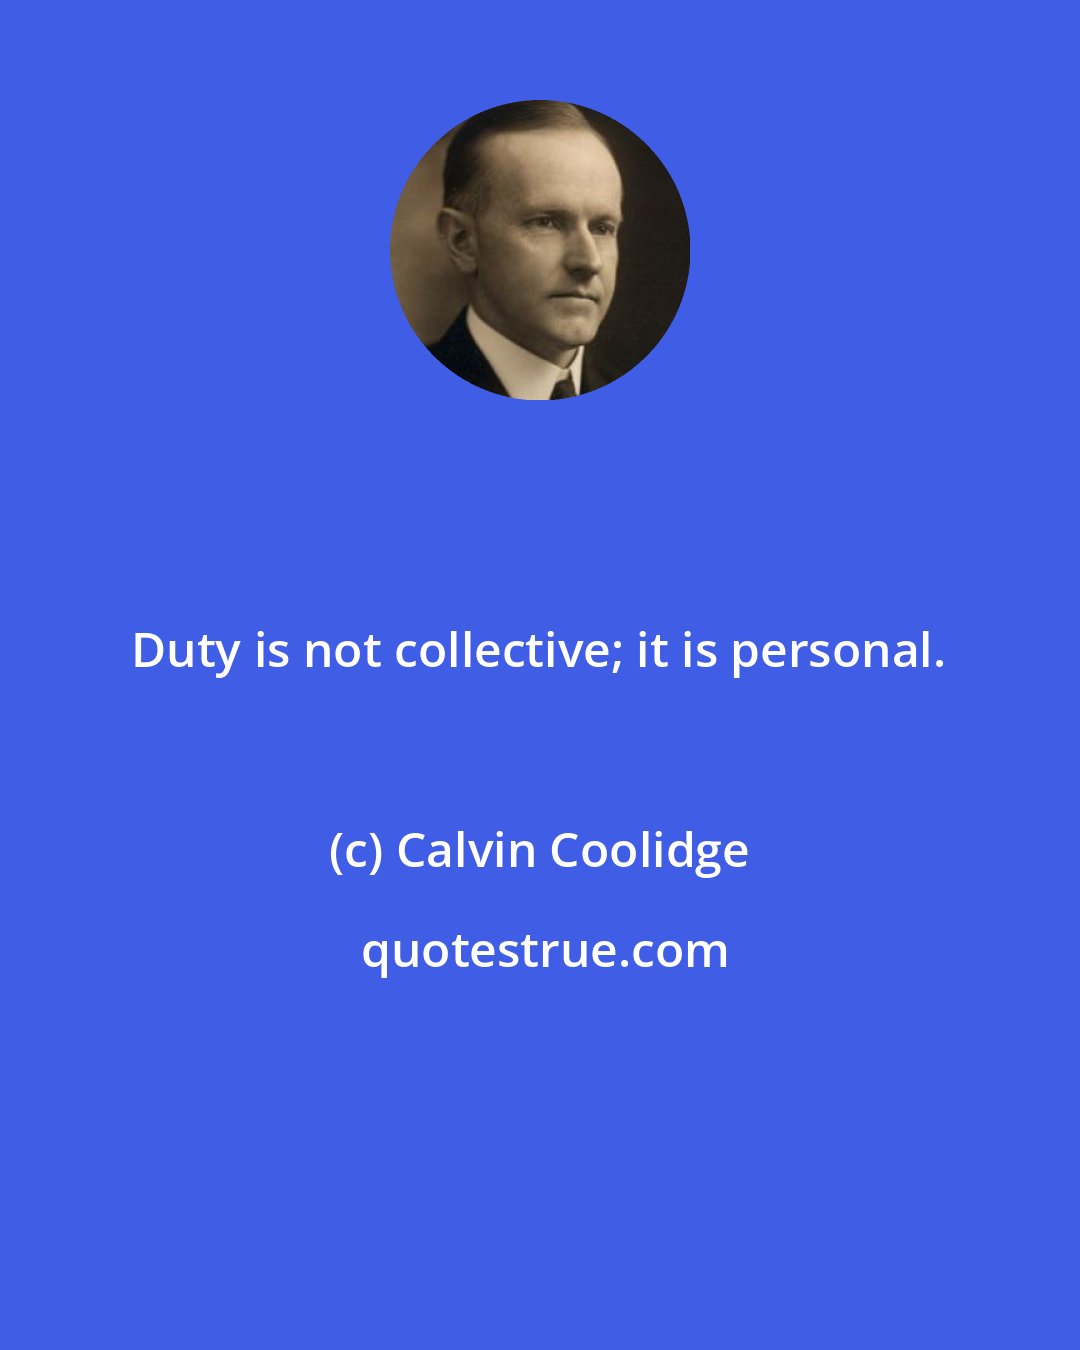 Calvin Coolidge: Duty is not collective; it is personal.